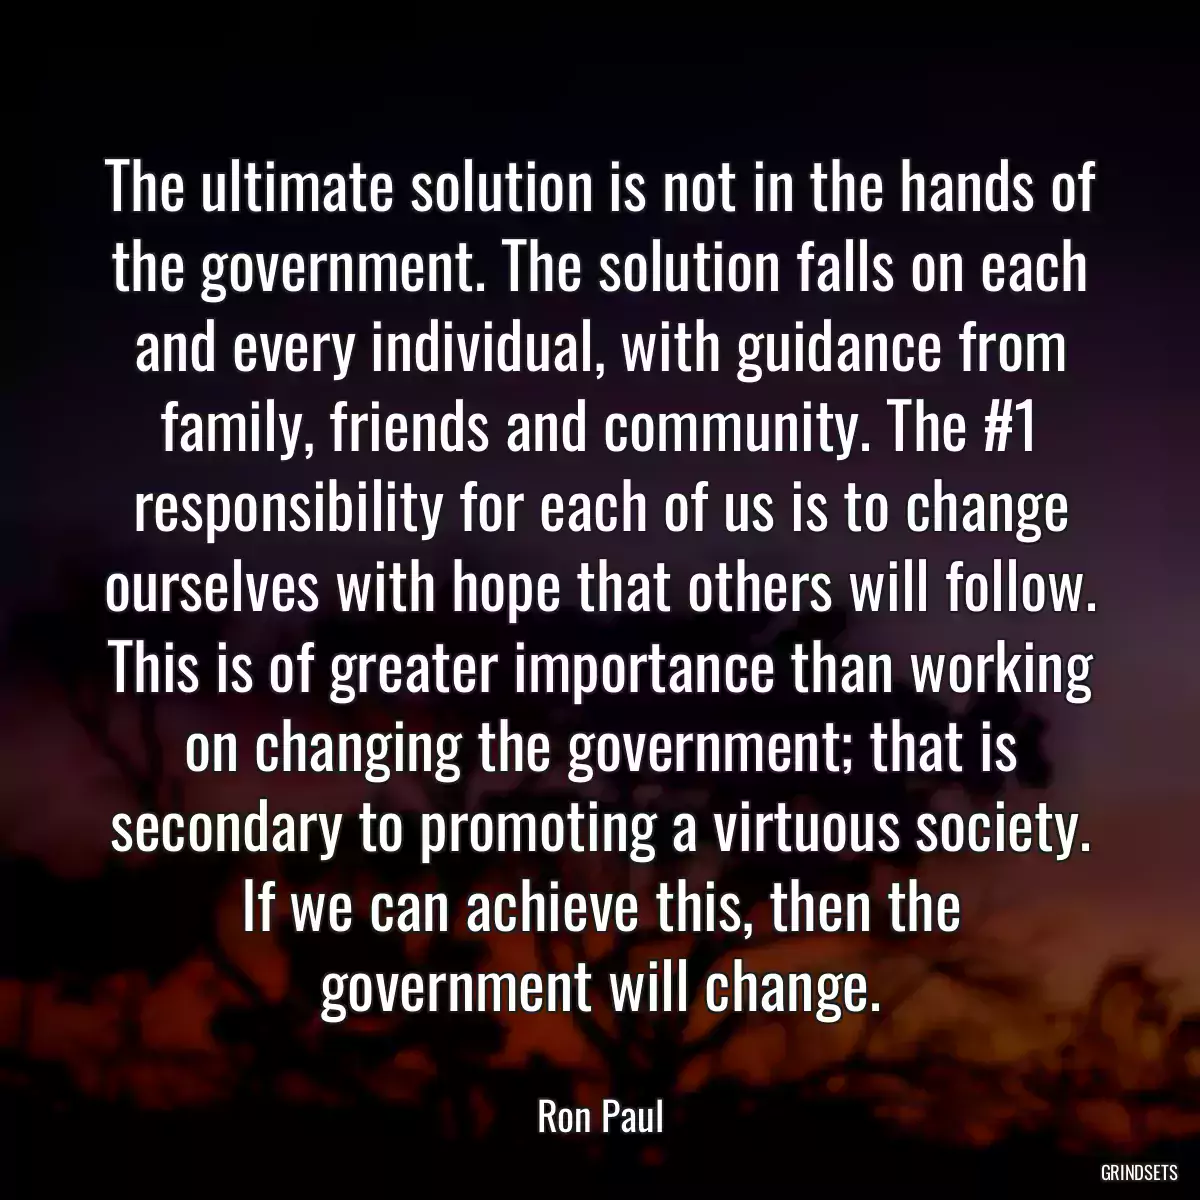 The ultimate solution is not in the hands of the government. The solution falls on each and every individual, with guidance from family, friends and community. The #1 responsibility for each of us is to change ourselves with hope that others will follow. This is of greater importance than working on changing the government; that is secondary to promoting a virtuous society. If we can achieve this, then the government will change.